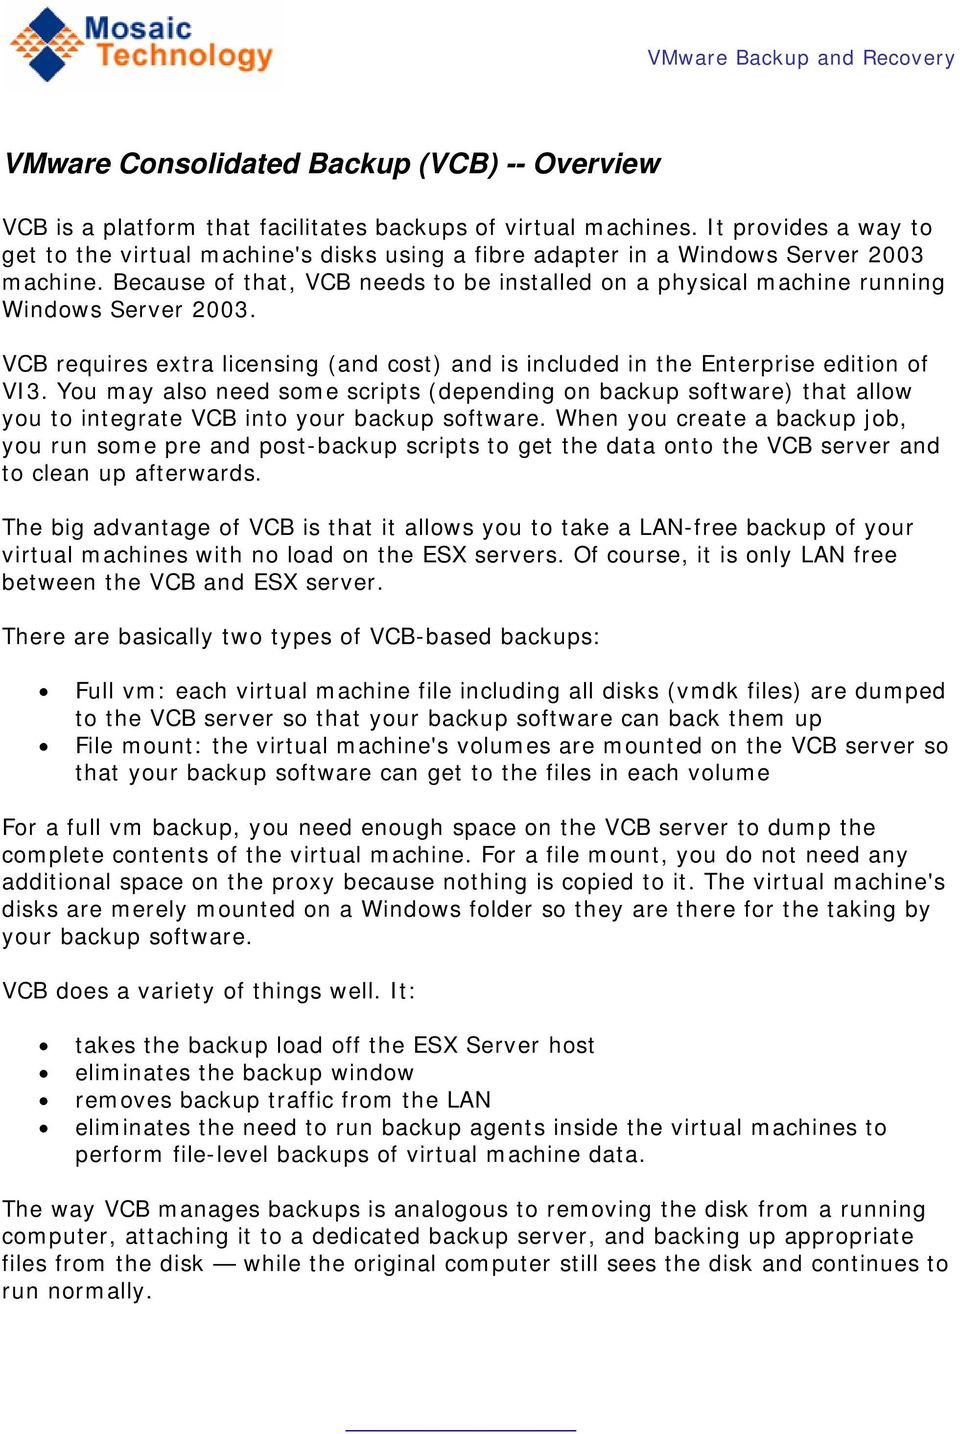 Because of that, VCB needs to be installed on a physical machine running Windows Server 2003. VCB requires extra licensing (and cost) and is included in the Enterprise edition of VI3.